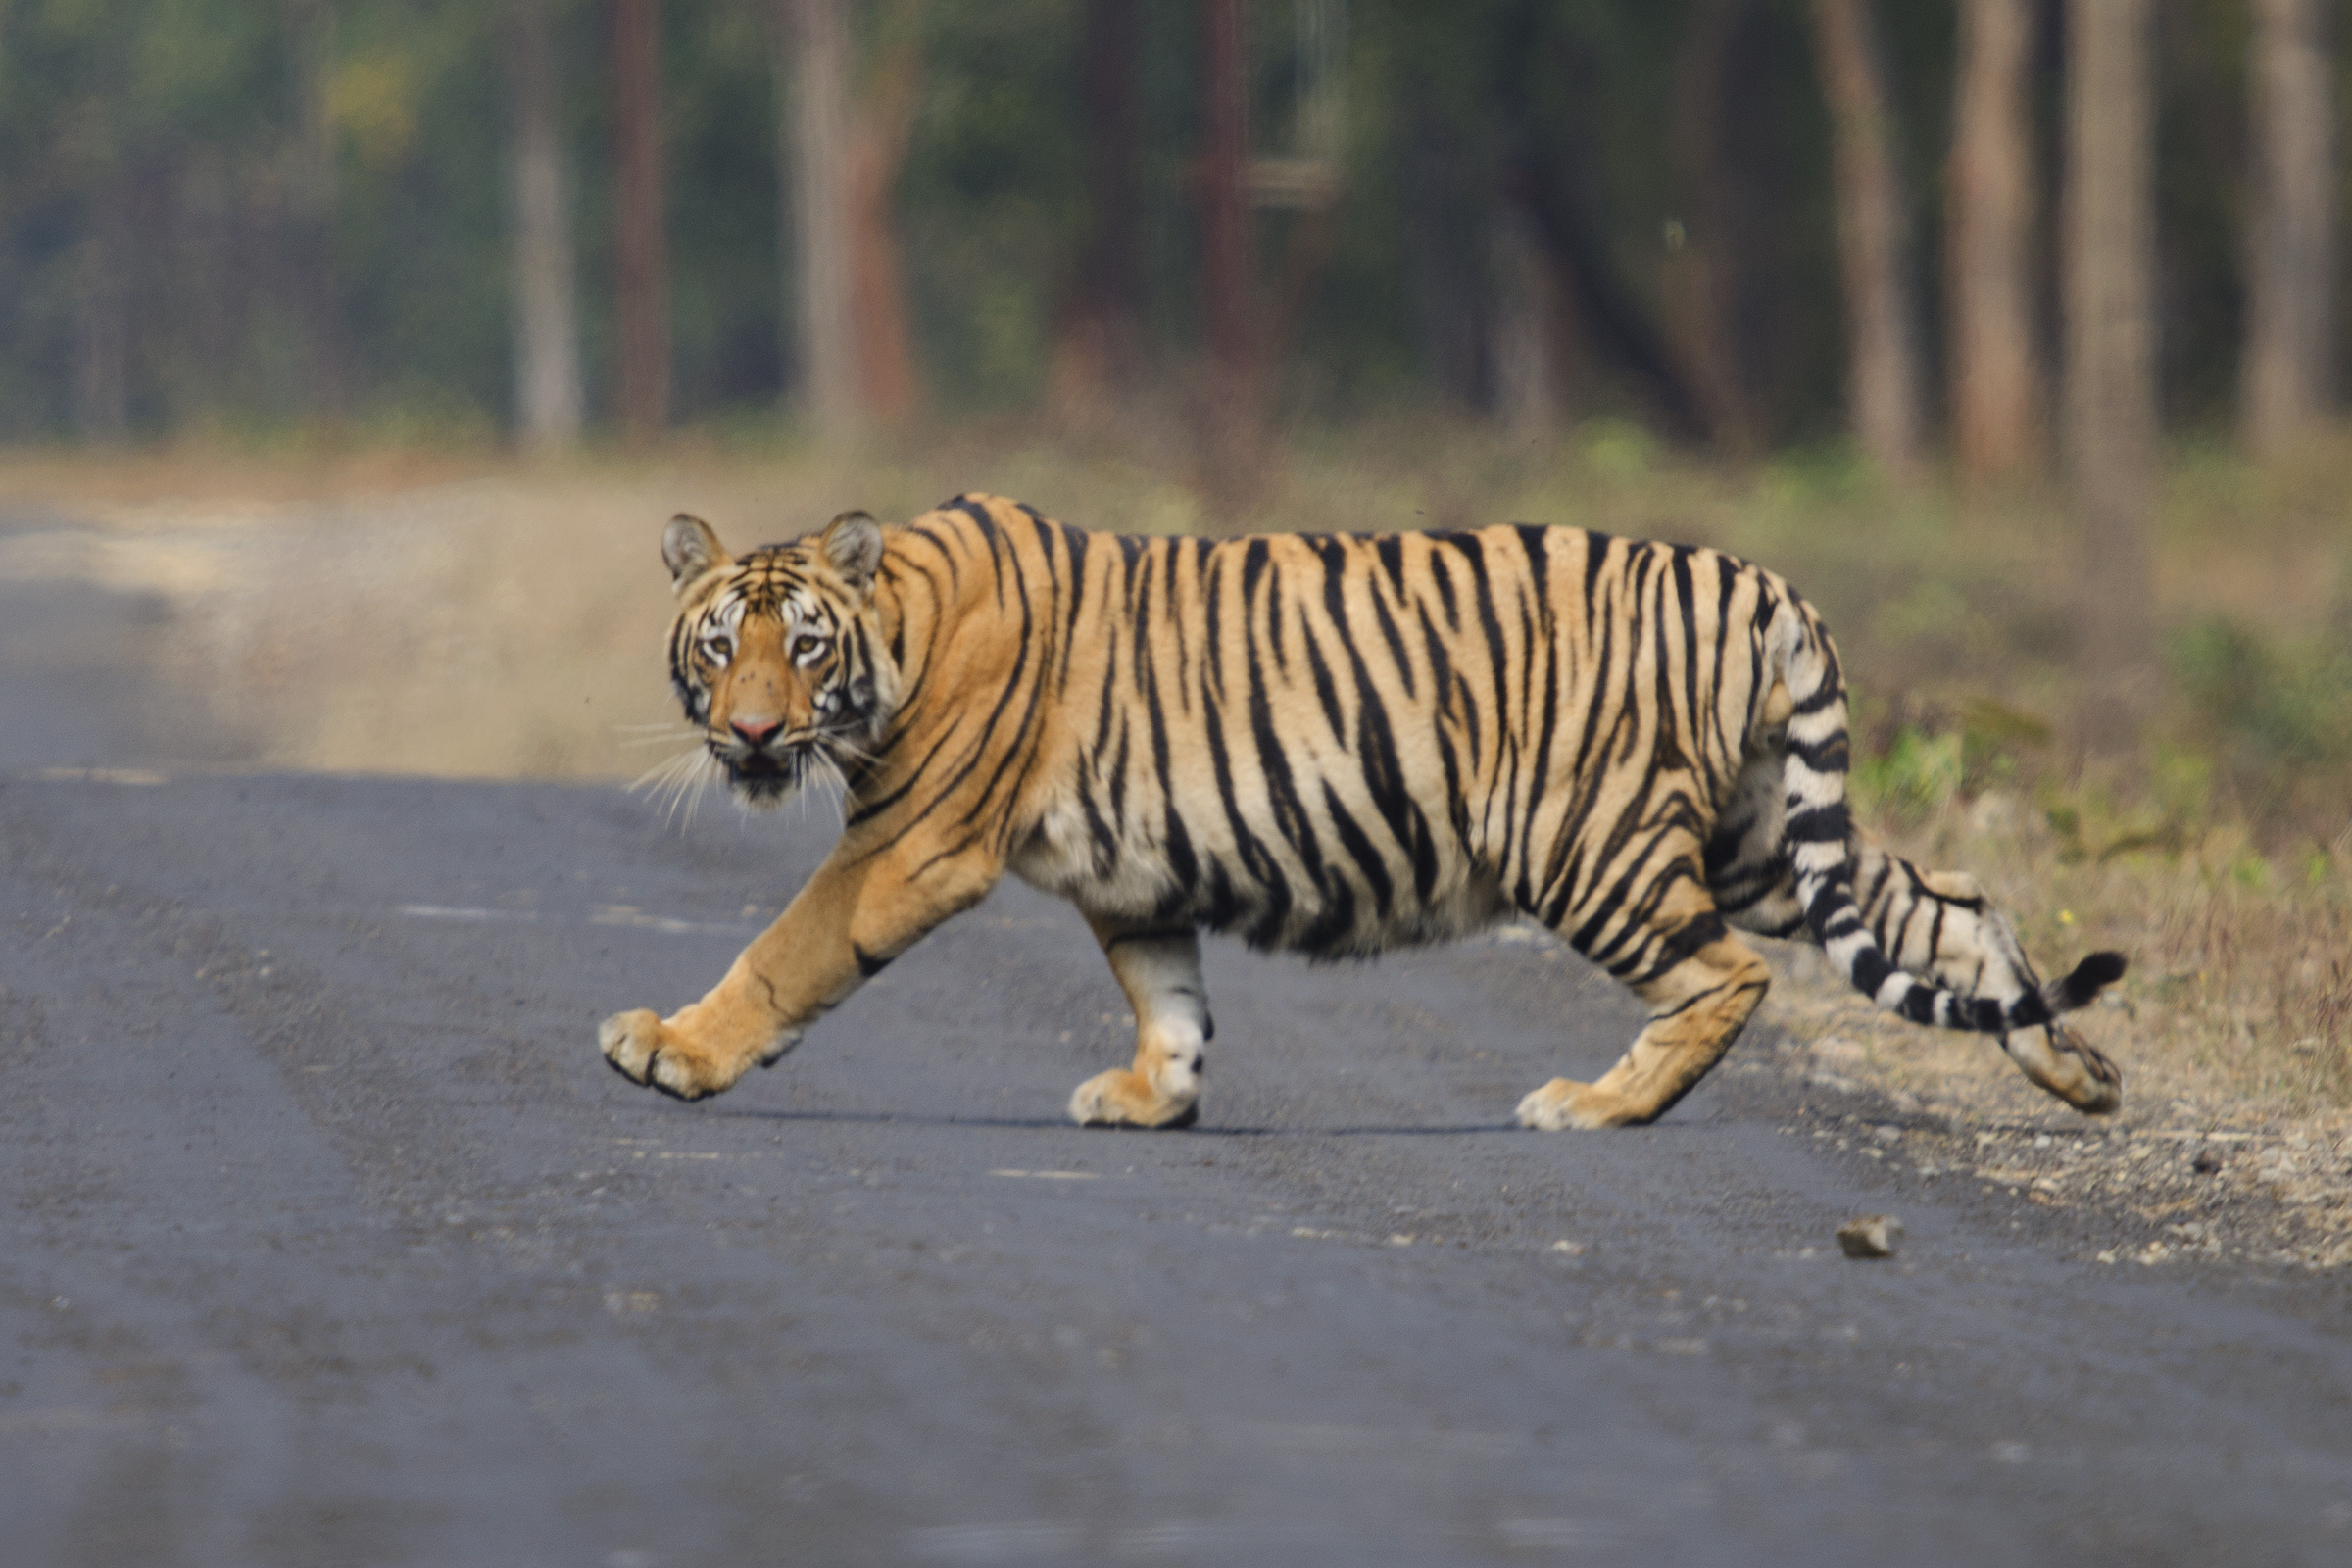 Planned Roads in Asia Threatening the Tiger’s Future